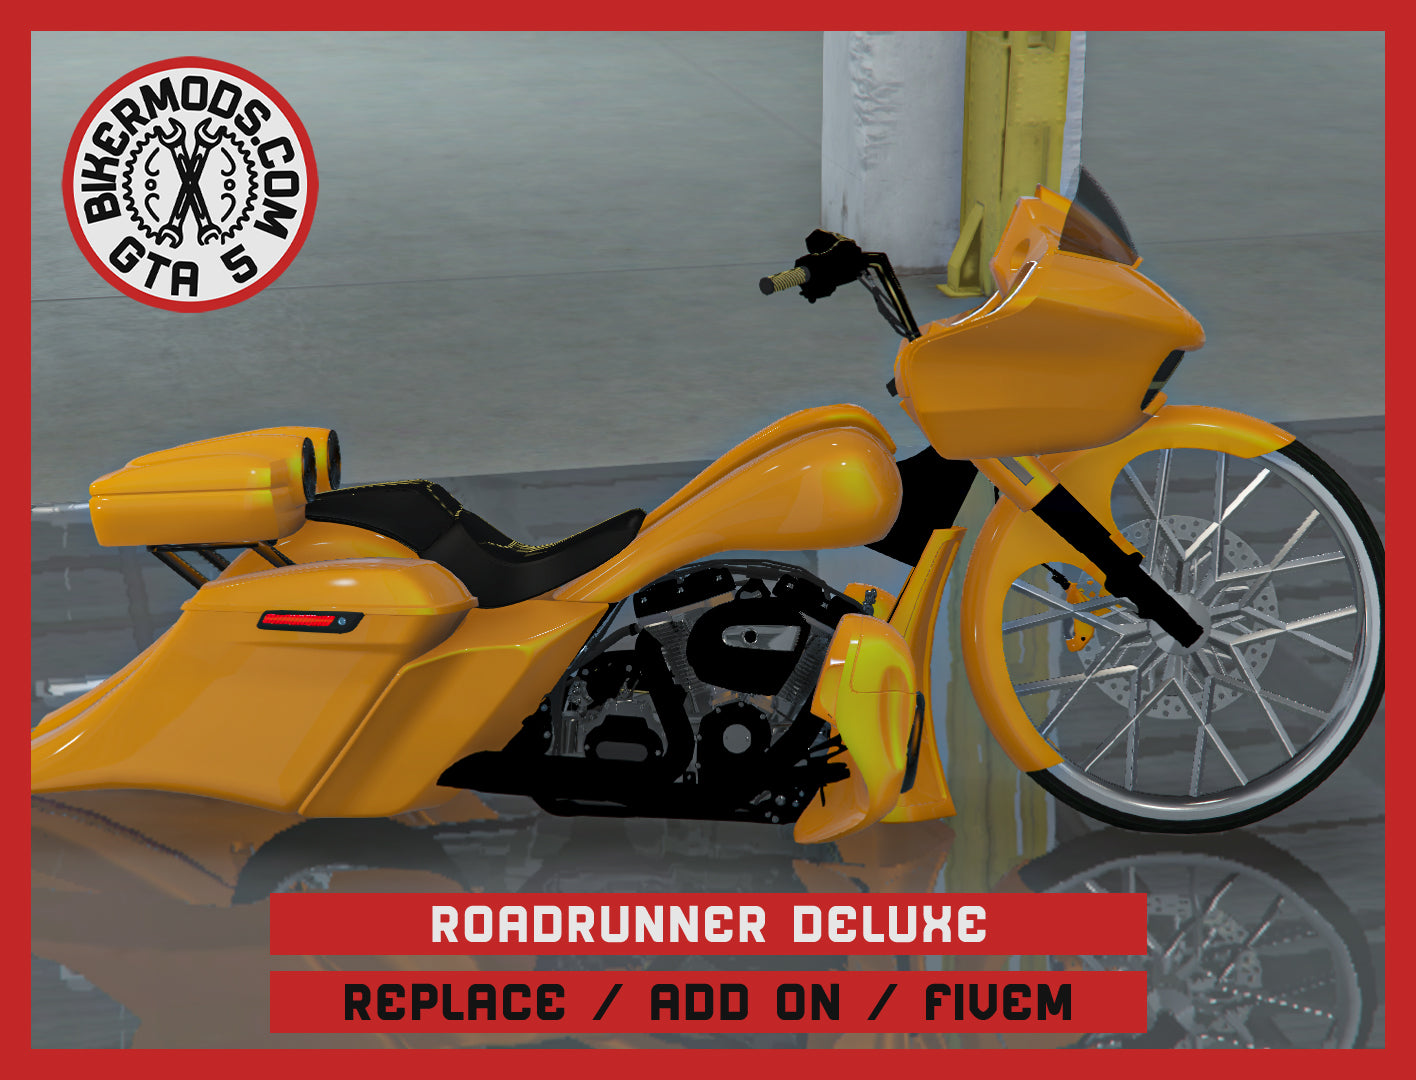 Roadrunner Deluxe (Replace Add On FiveM) 246k Poly